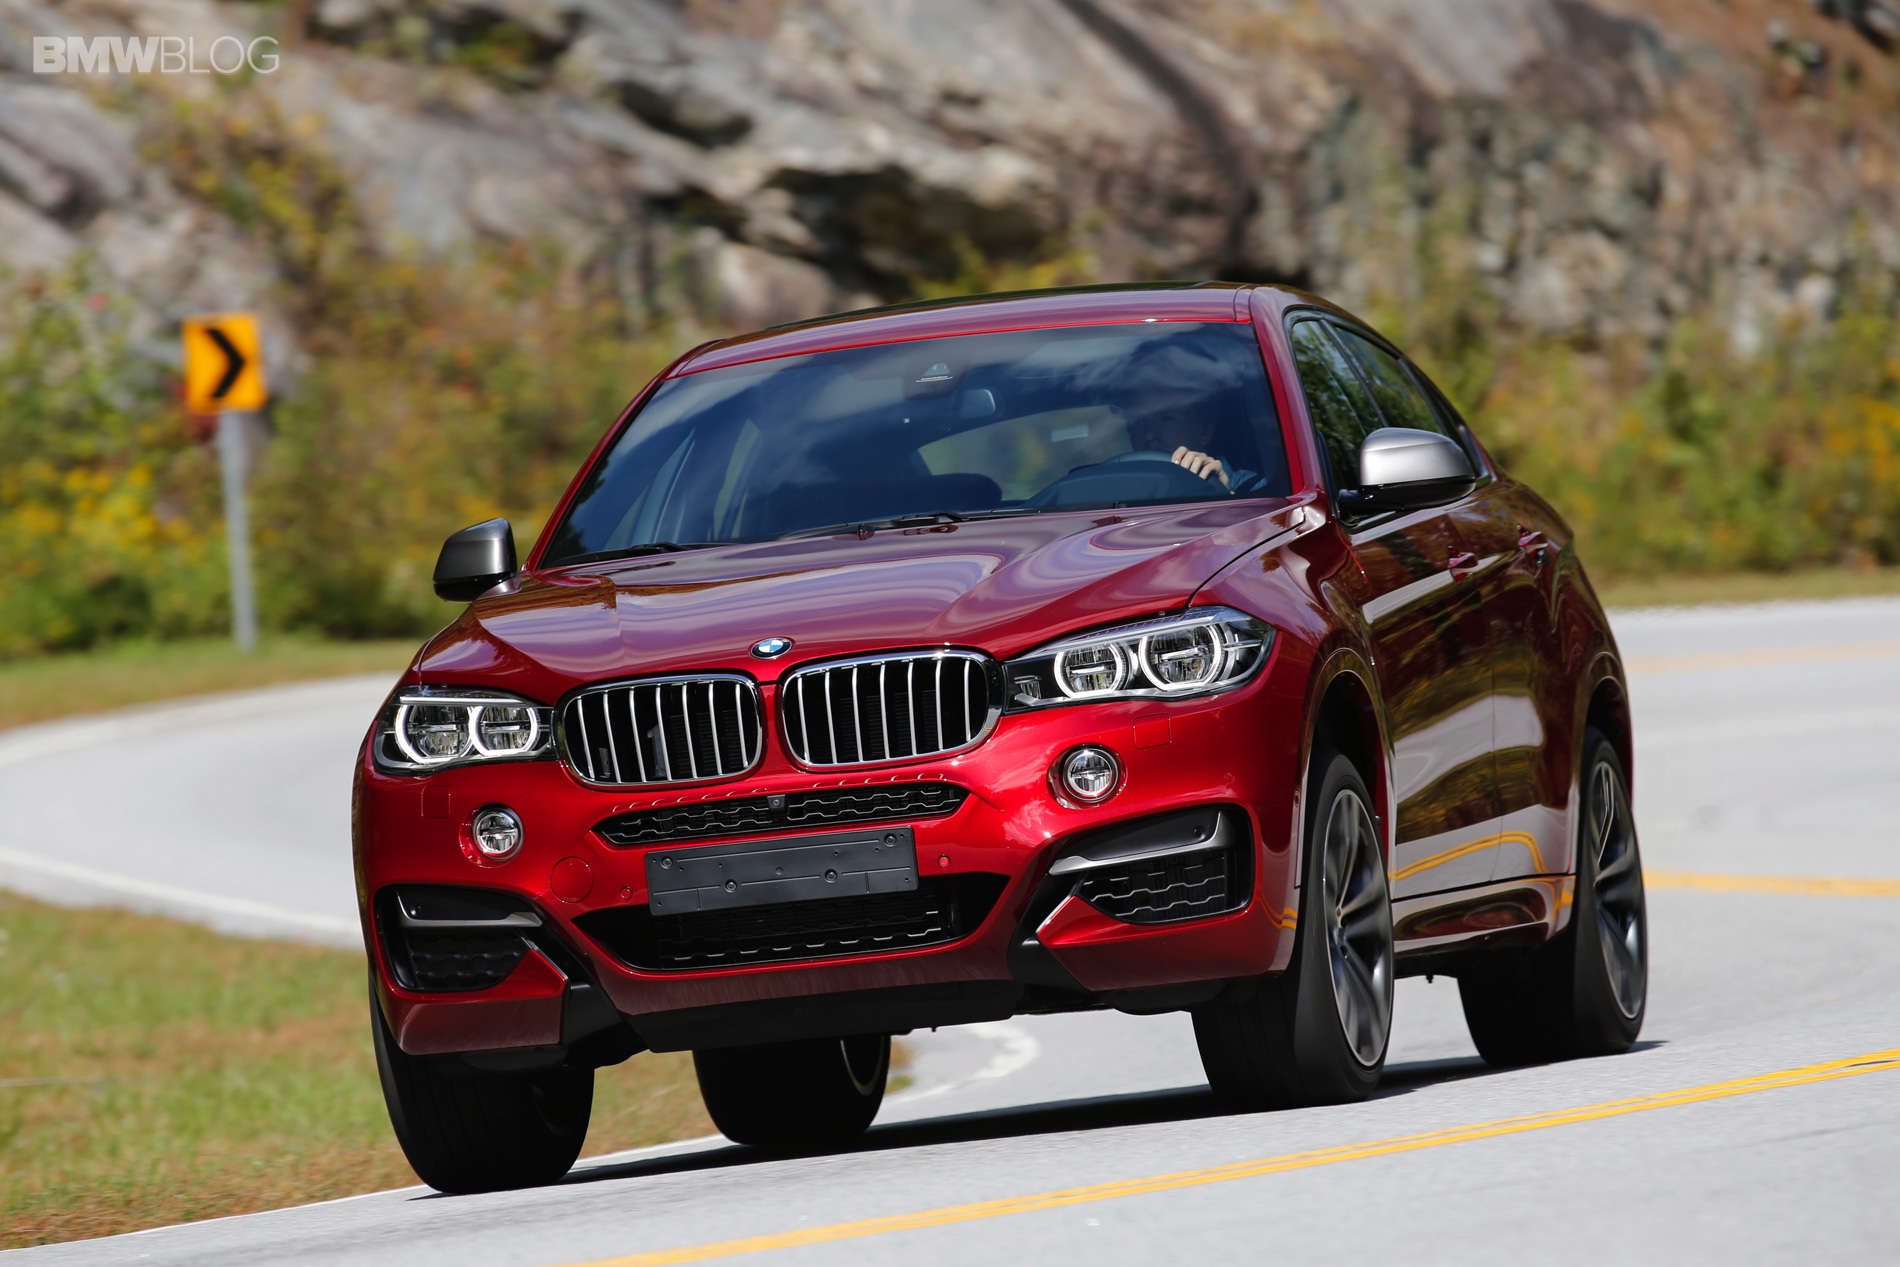 Bmw x6 review top gear #4